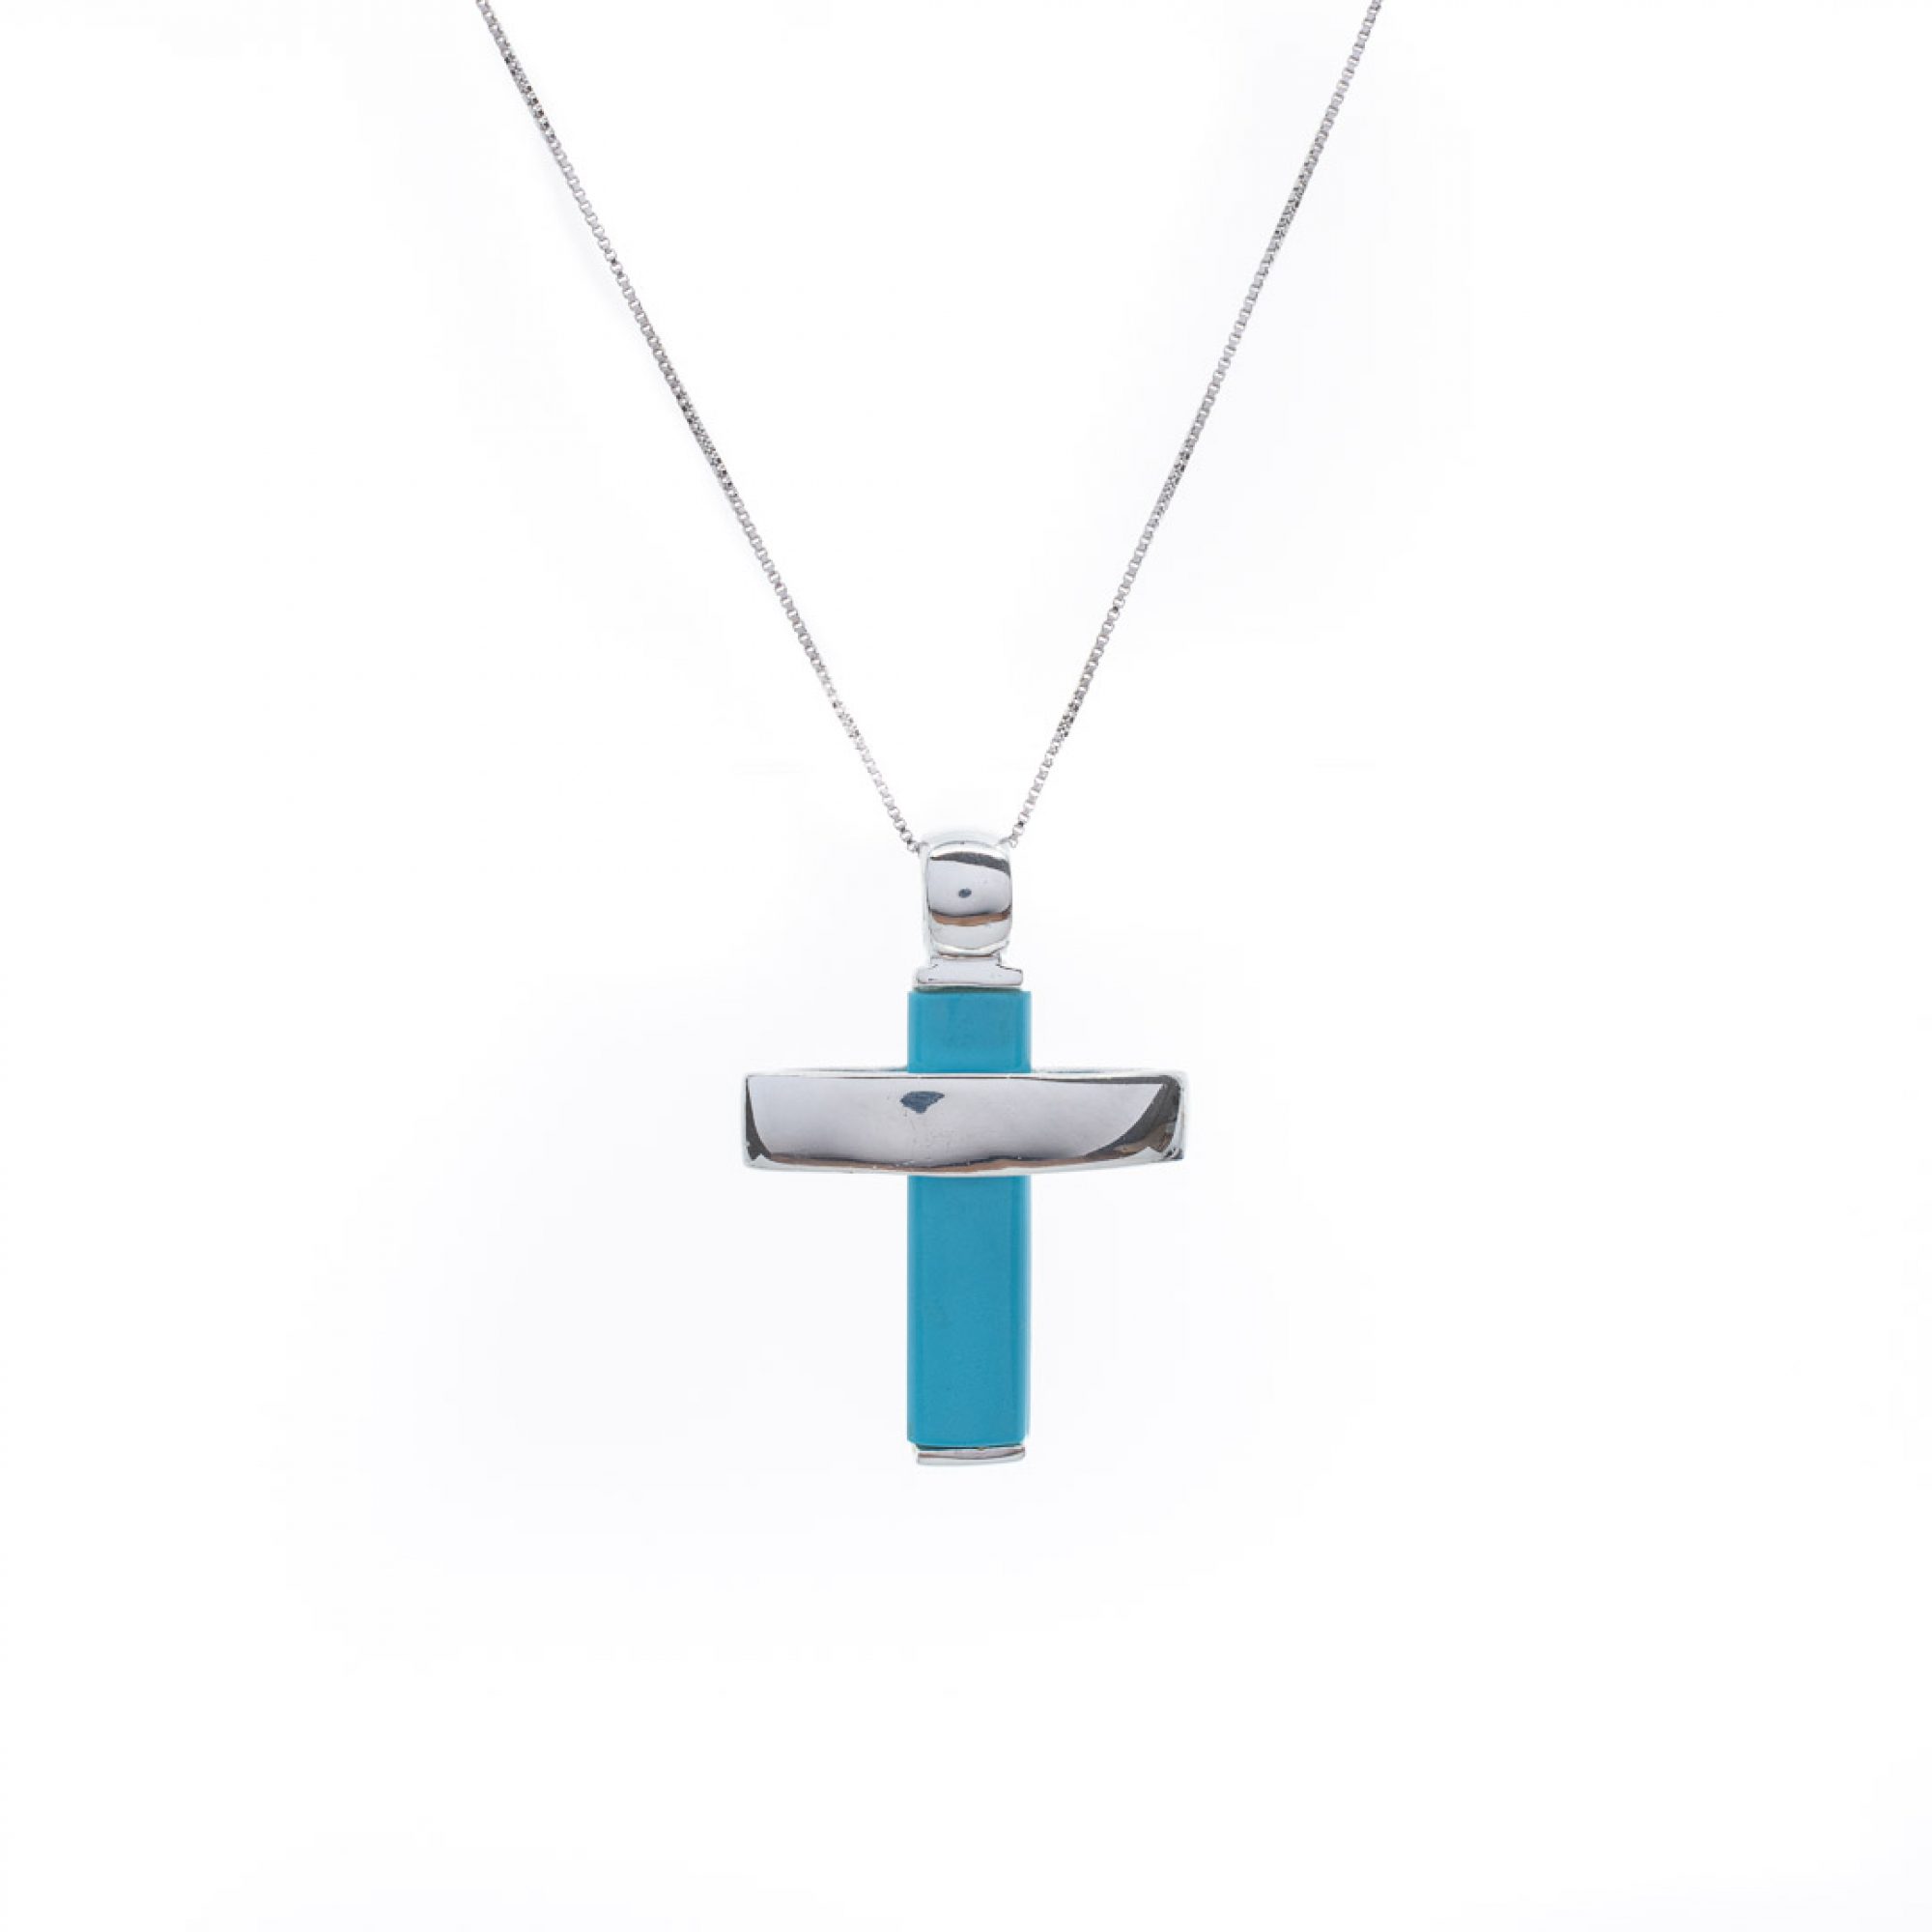 Cross pendant with natural turquoise stone